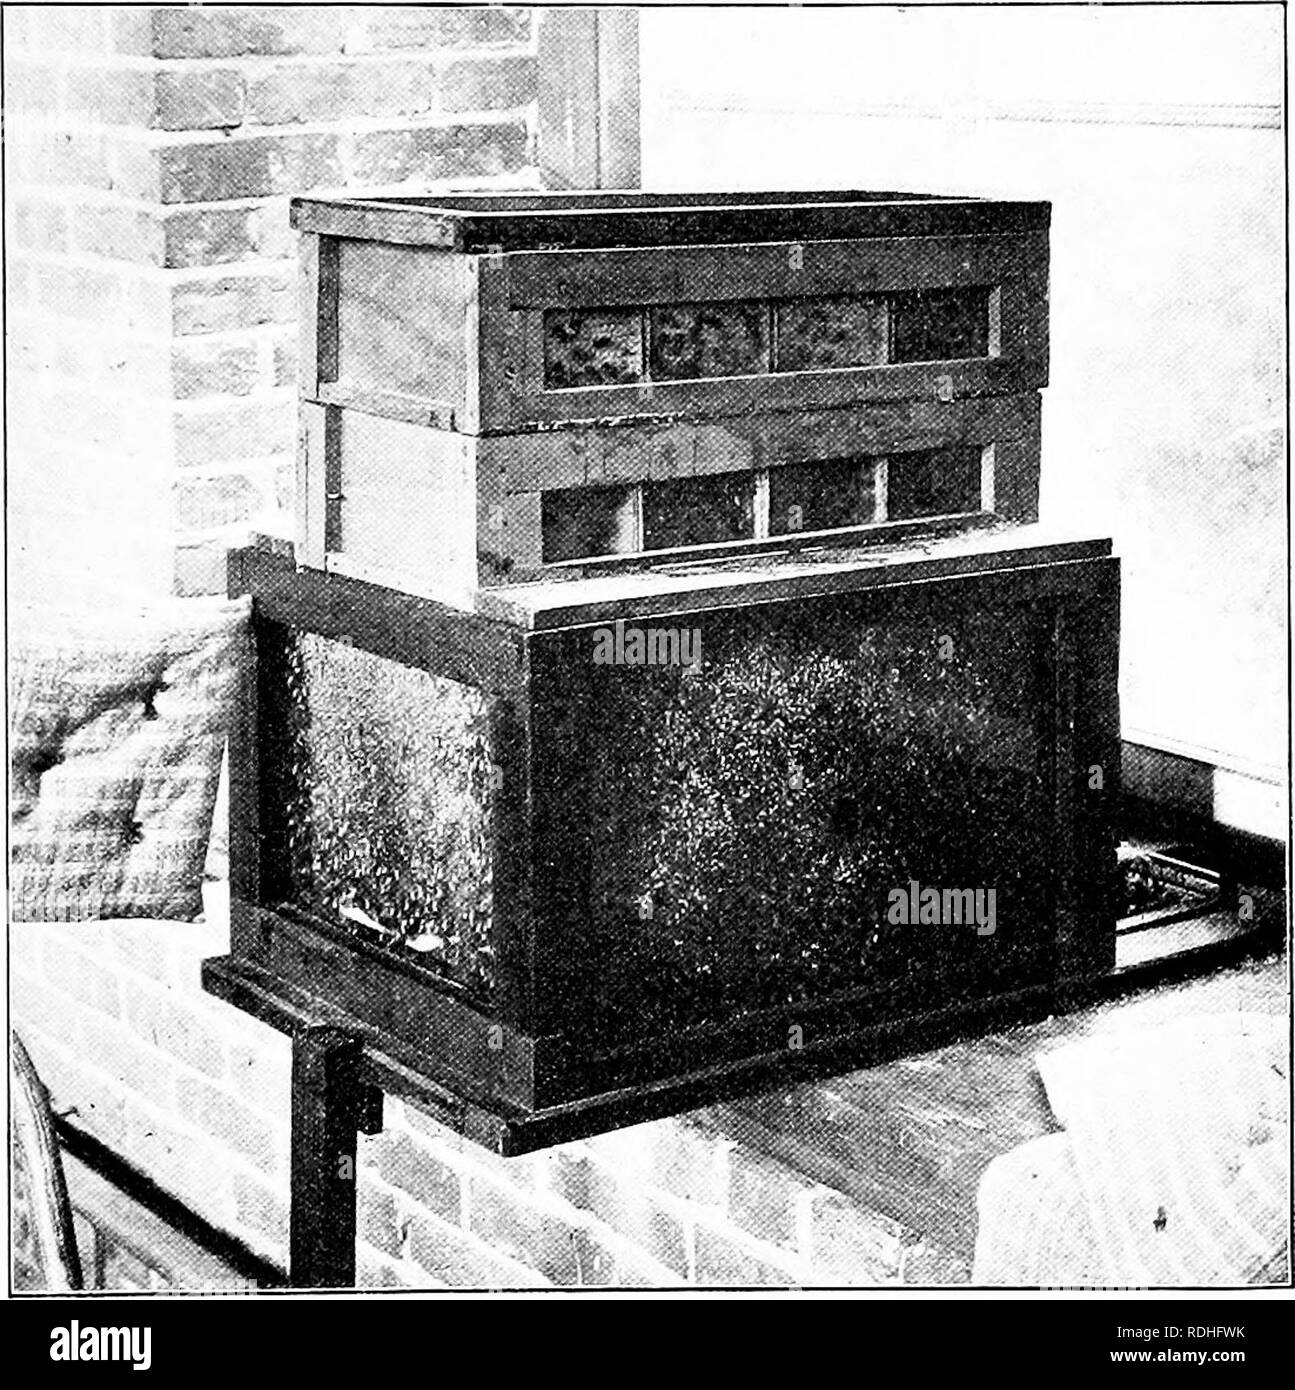 . Nature study and life. Nature study. ISENEFICIAL INSECTS 235 It remains to mount the hive in some upstairs window, preferably in tlie attic, or in some room tiiat is not used.. Fig. 99. Observation Hive in Position The large box is known as the &quot; brood chamber,&quot; or &quot; hive body,&quot; In it the queen lives and lays eggs, and the bees nurse the young, or &quot; brood.&quot; The two cases above are the &quot; supers,&quot; in which the bees store their surplus honey. Toward the window is seen the wire screen passageway, through which the workers go and come Fasten a narrow board  Stock Photo